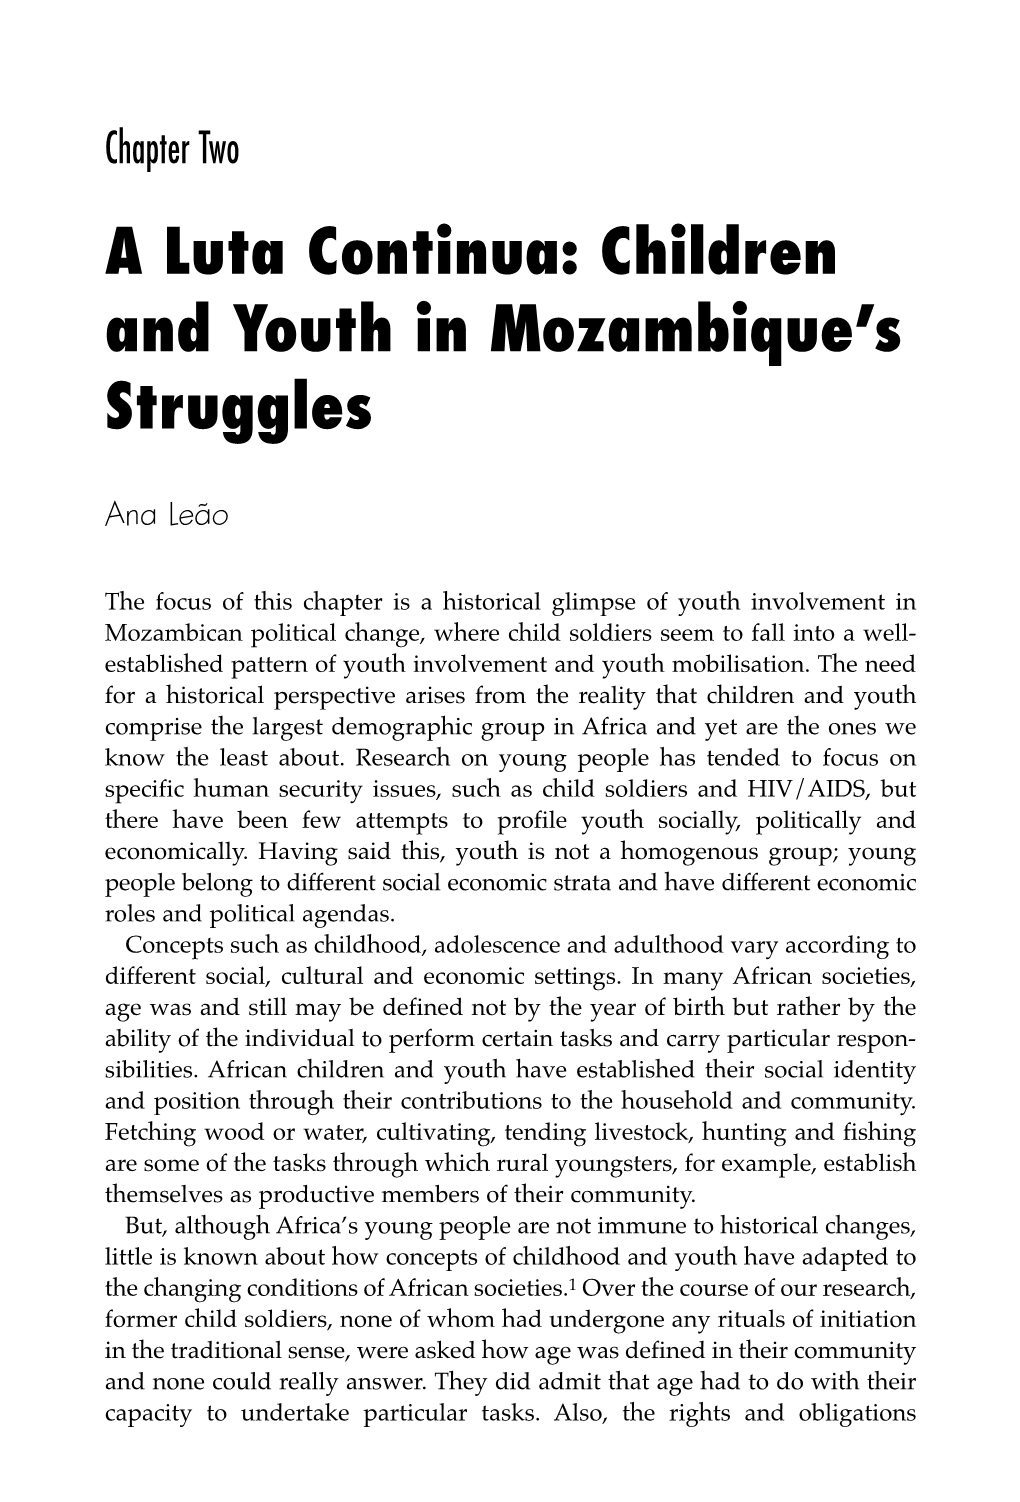 A Luta Continua: Children and Youth in Mozambique’S Struggles